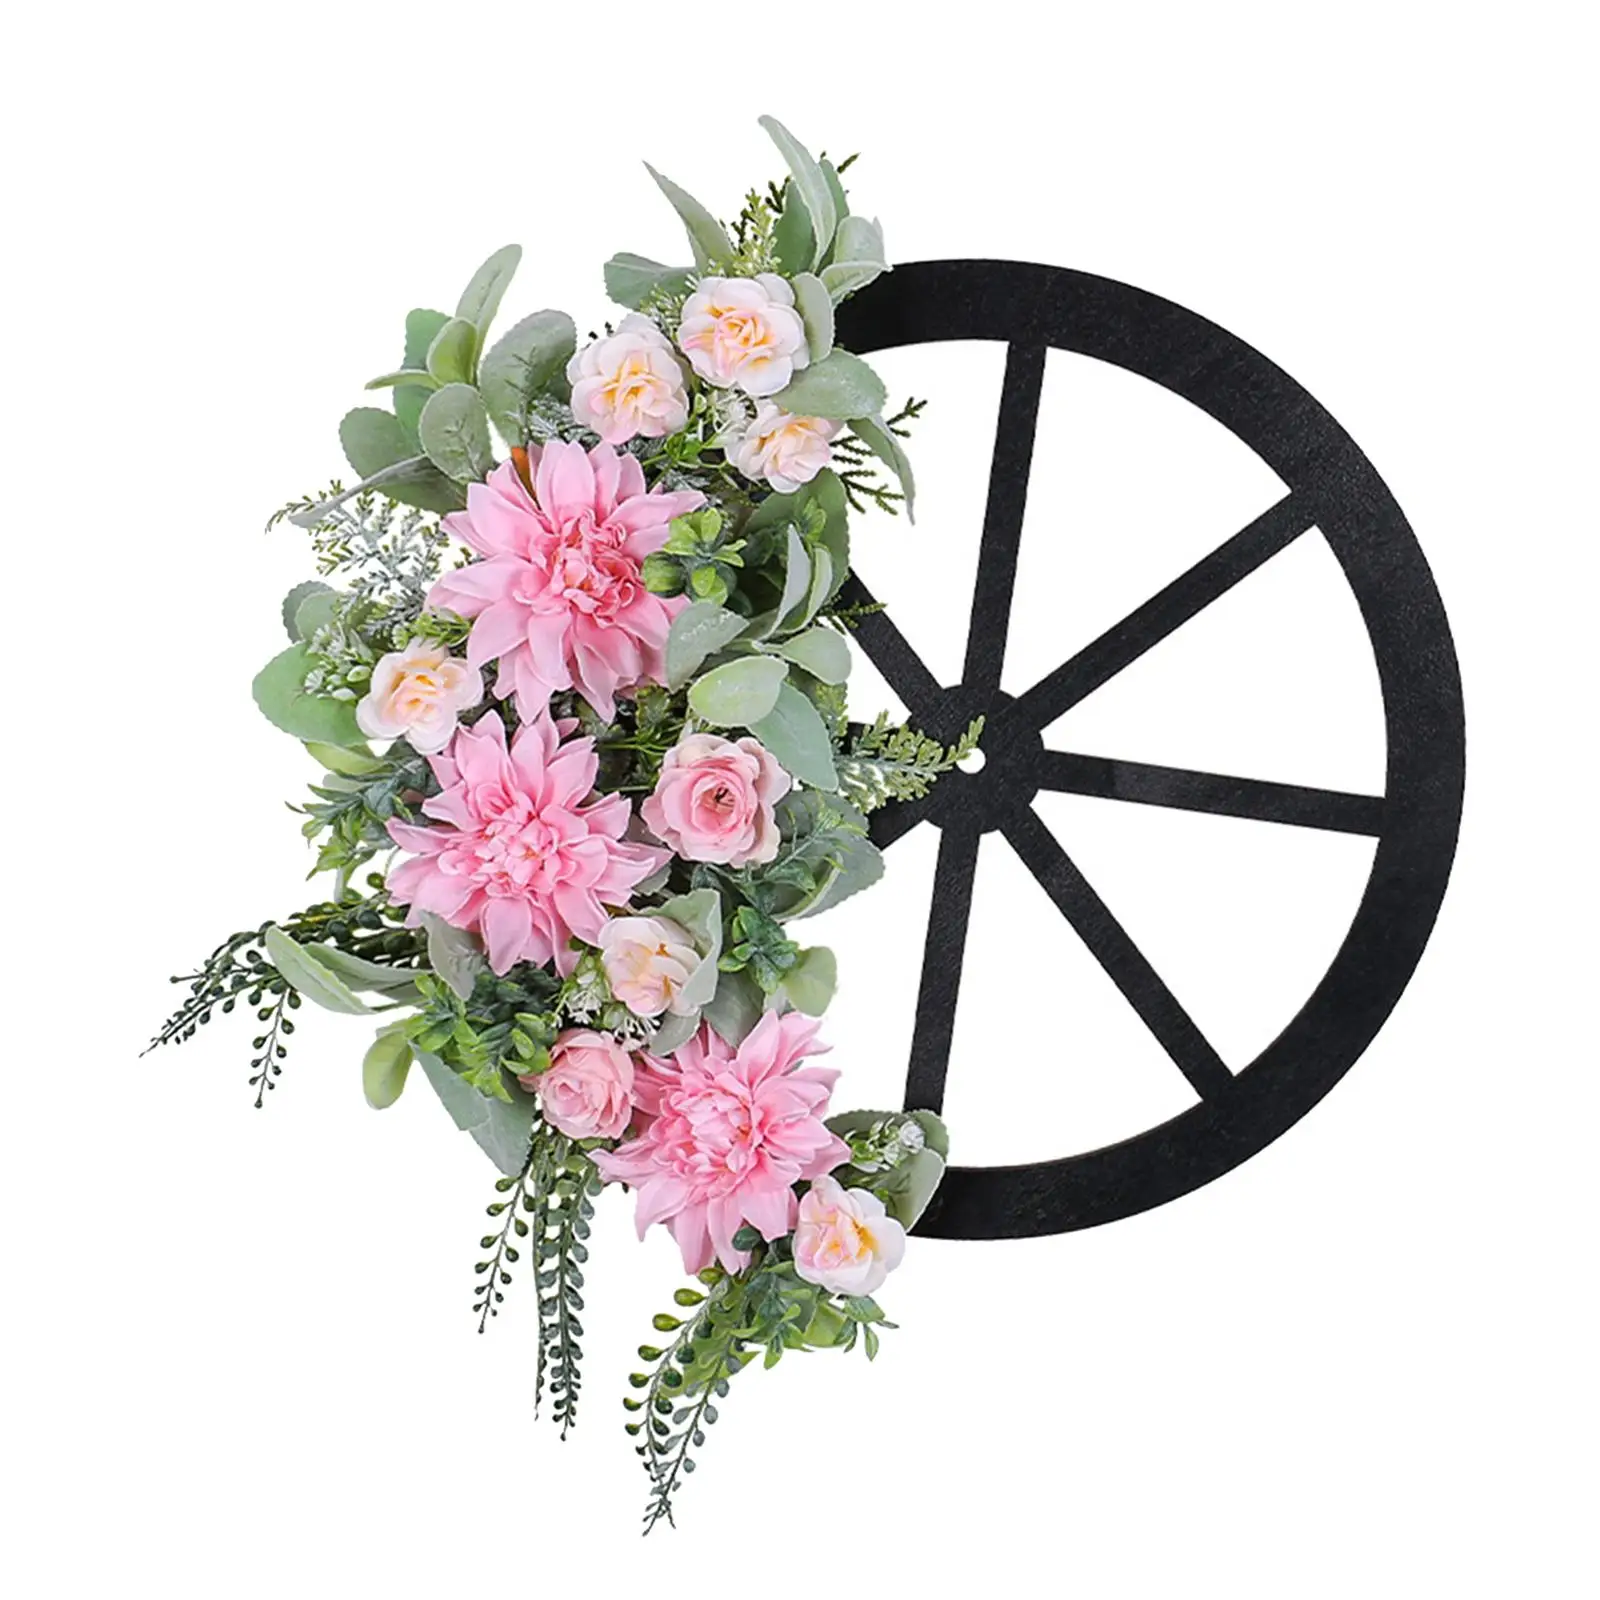 Spring Wreath Pink Artificial Flowers and Wheel Handmade for Home Door Decor